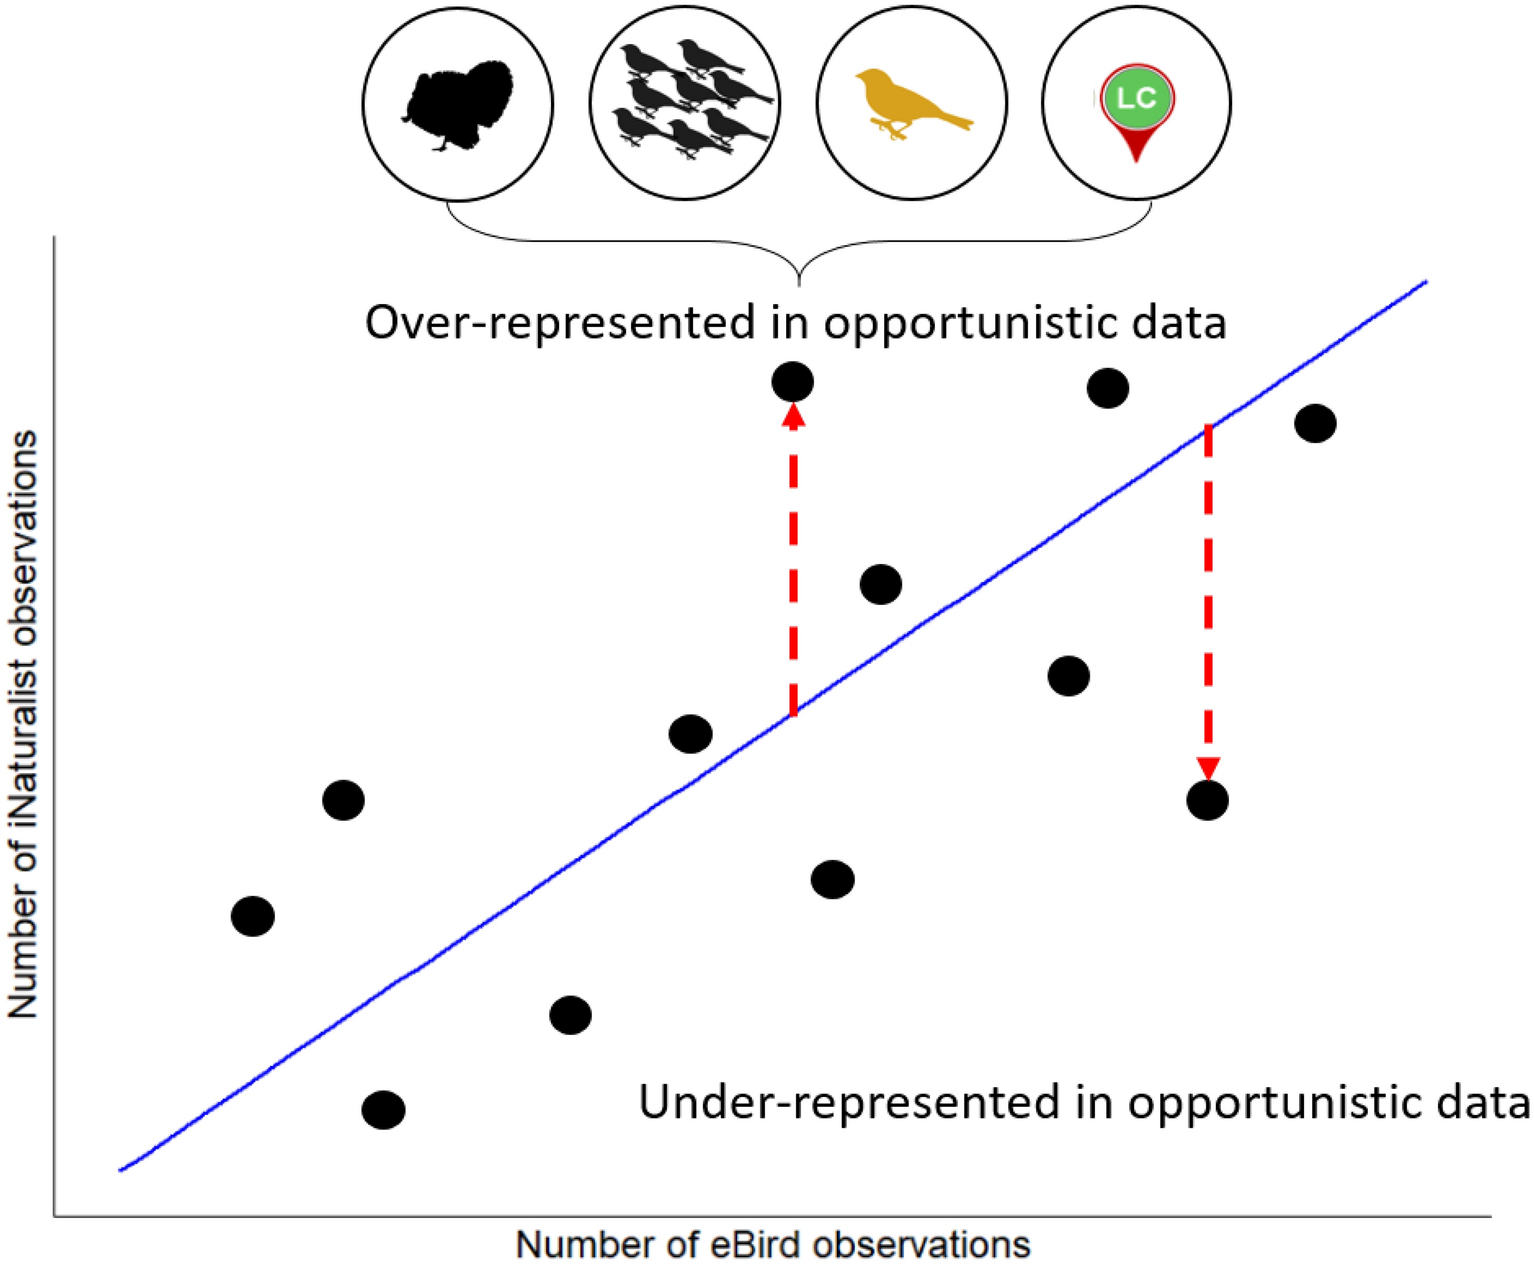 Large-bodied birds are over-represented in unstructured citizen science data Scientific Reports